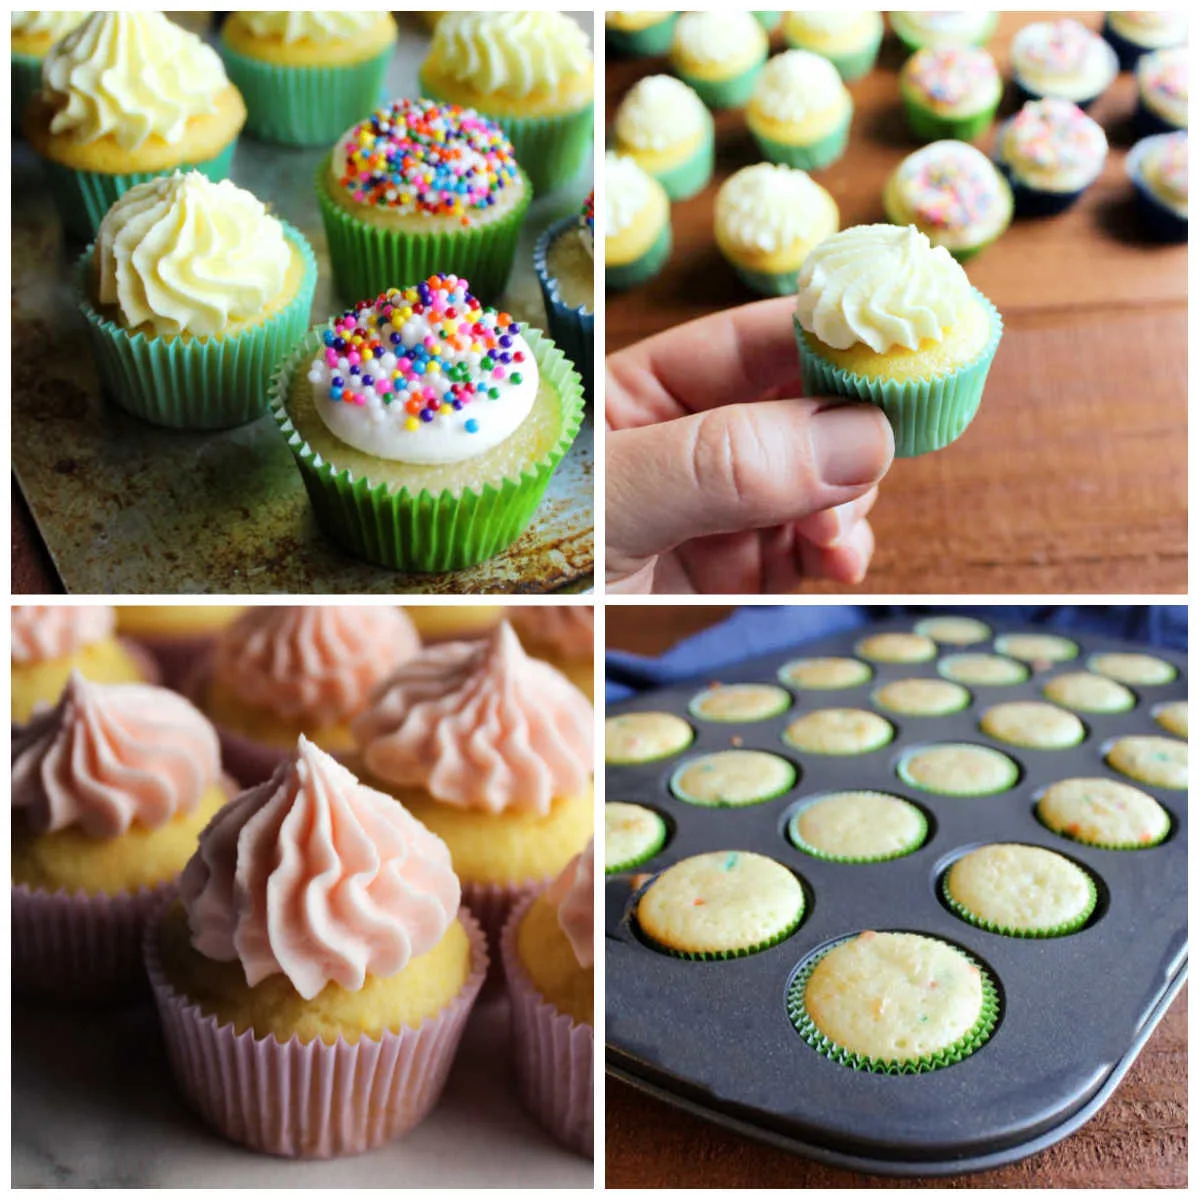 Collage of various images of mini cupcakes.